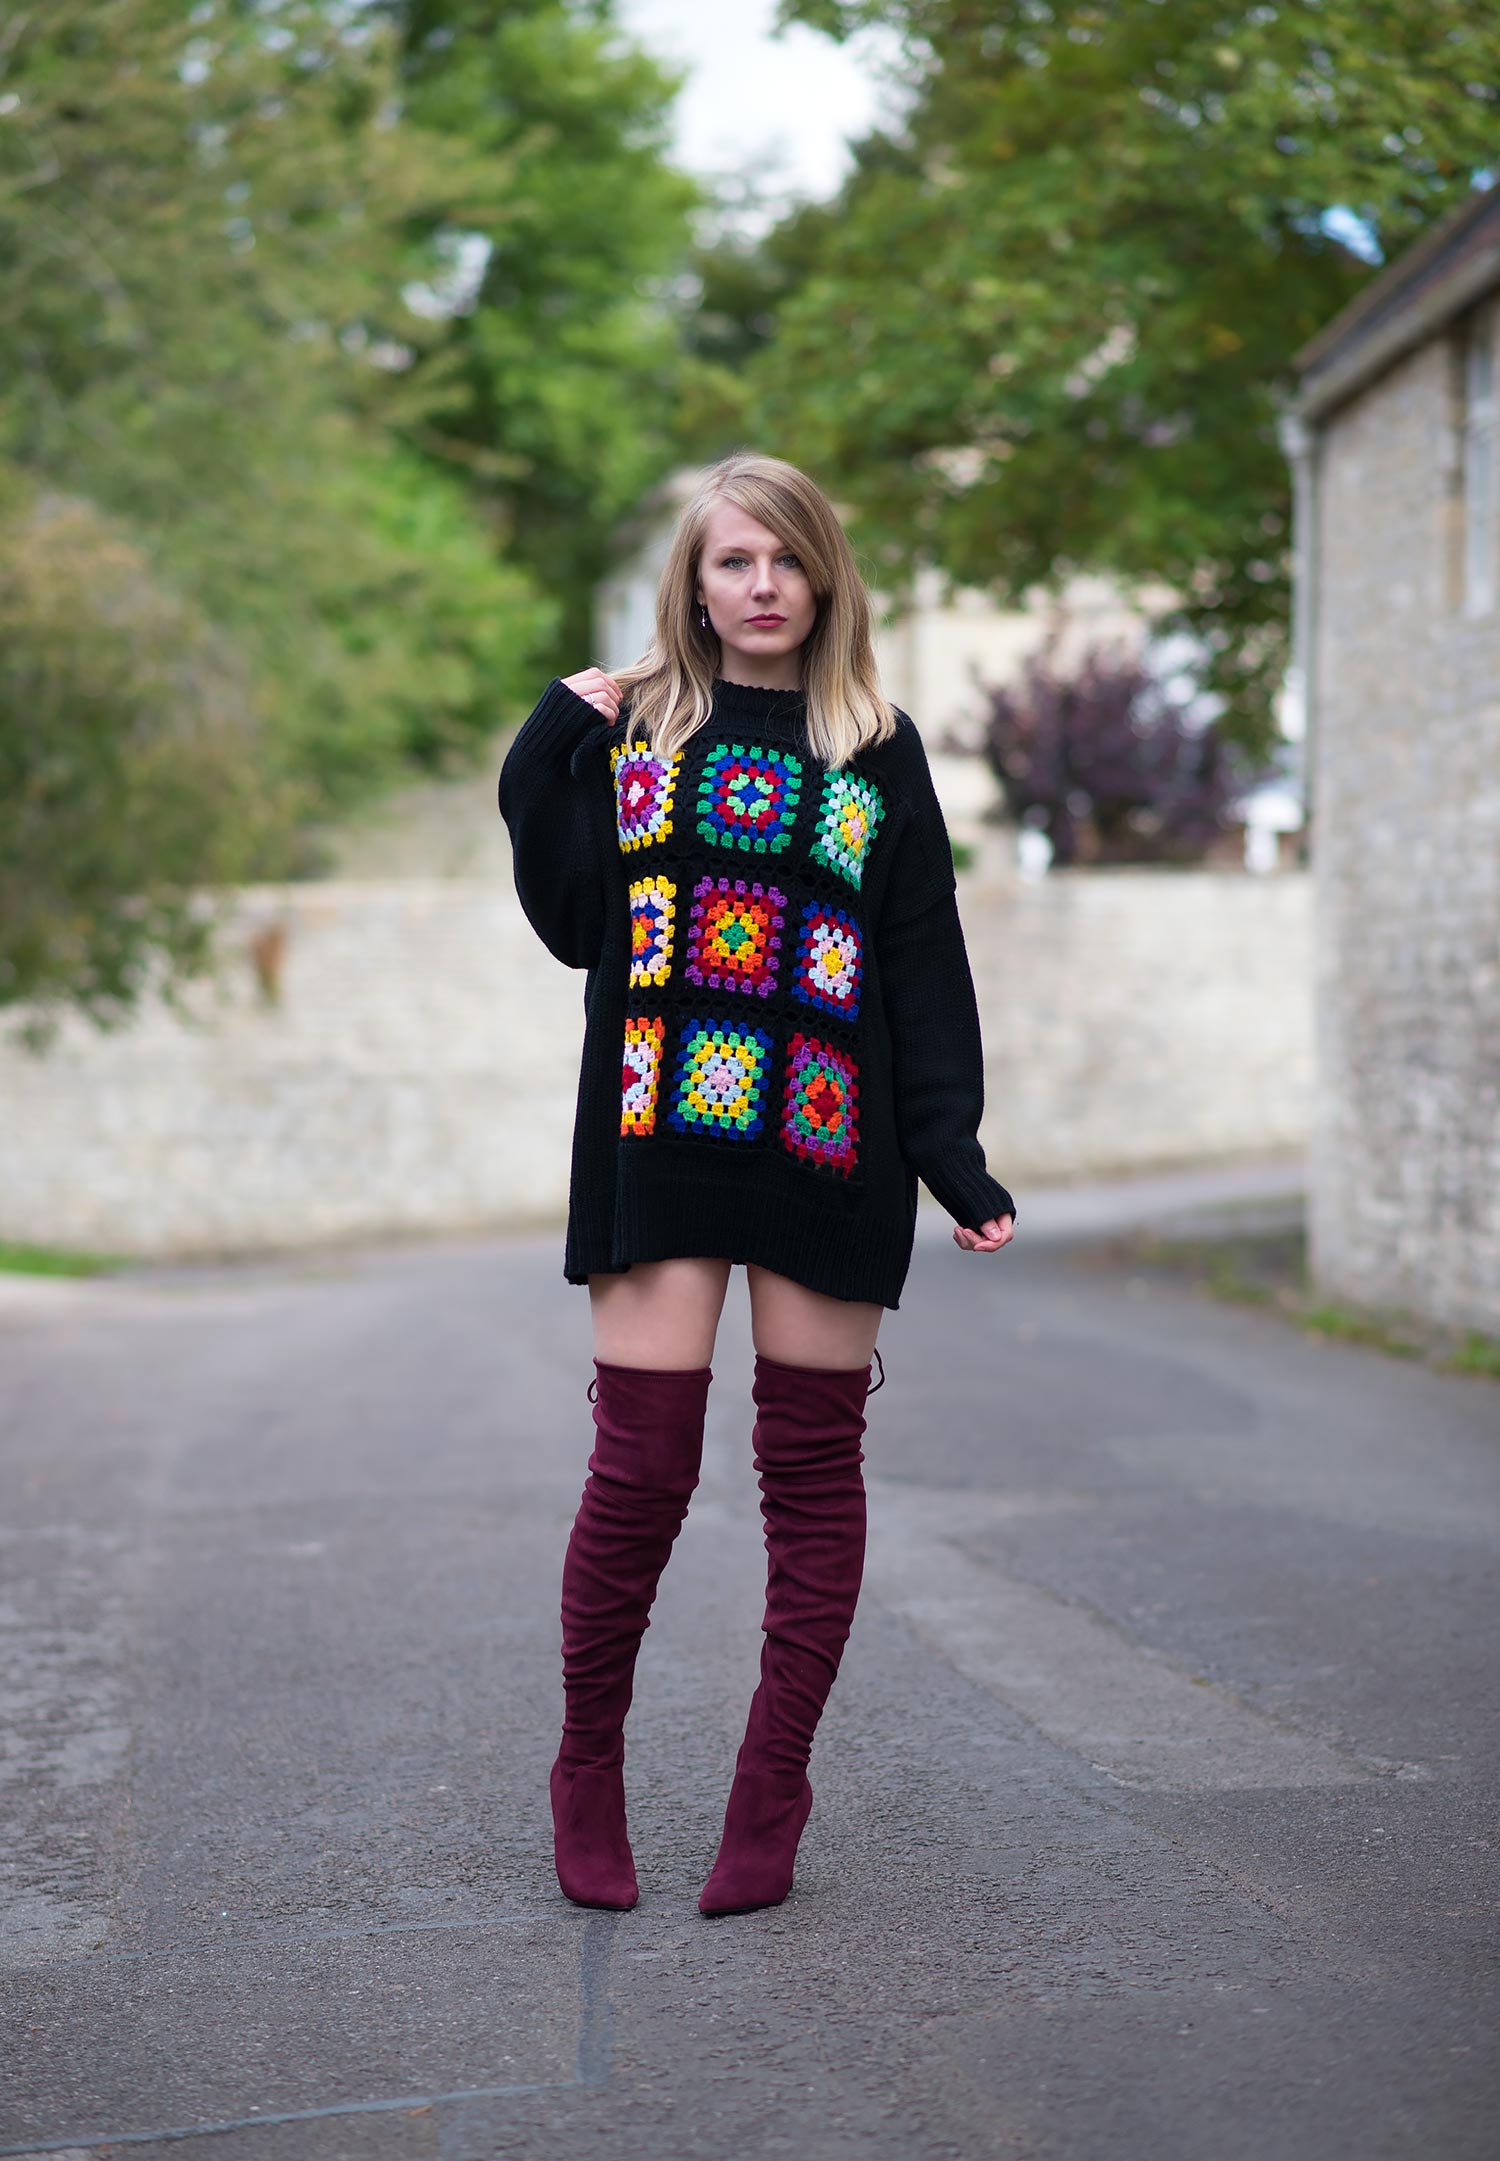 sweater dress and thigh high boots